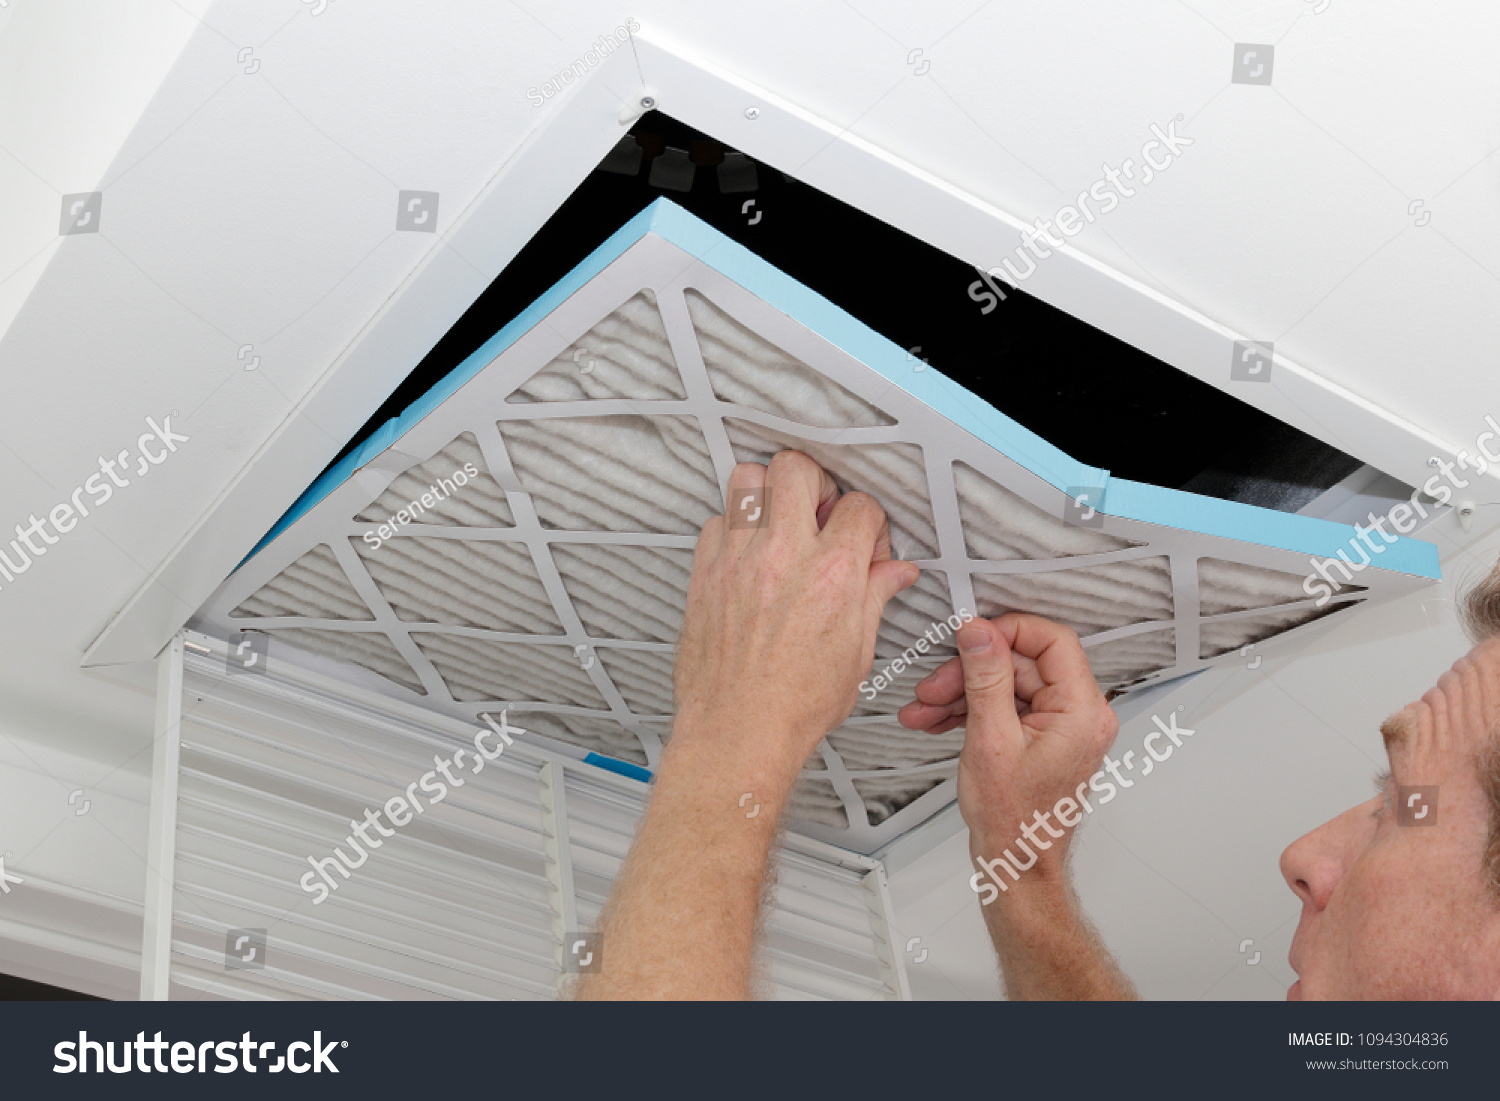 Person removing an old dirty air filter from a ceiling intake vent of a home HVAC system. Unclean gray square furnace air filter being taken out of a ceiling air vent. #1094304836